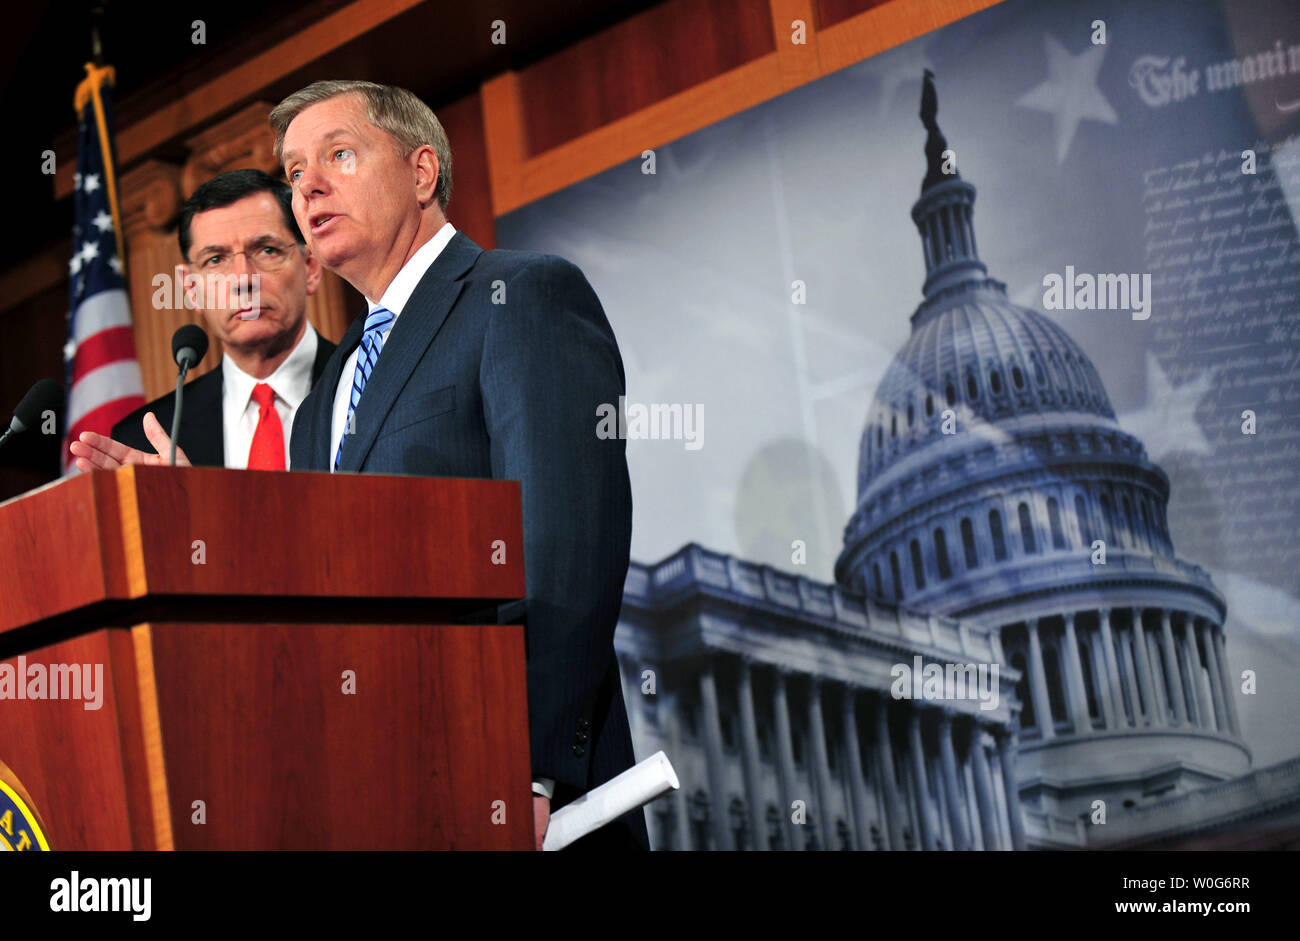 Sen. Lindsey Graham (R-SC) and Sen. John Barrasso (R-WY) speak at a news conference on legislation to repeal and replace the health care law by allowing states to 'Opt-Out' of its major provisions, Capitol Hill in Washington on February 1, 2011.  UPI/Kevin Dietsch.. Stock Photo